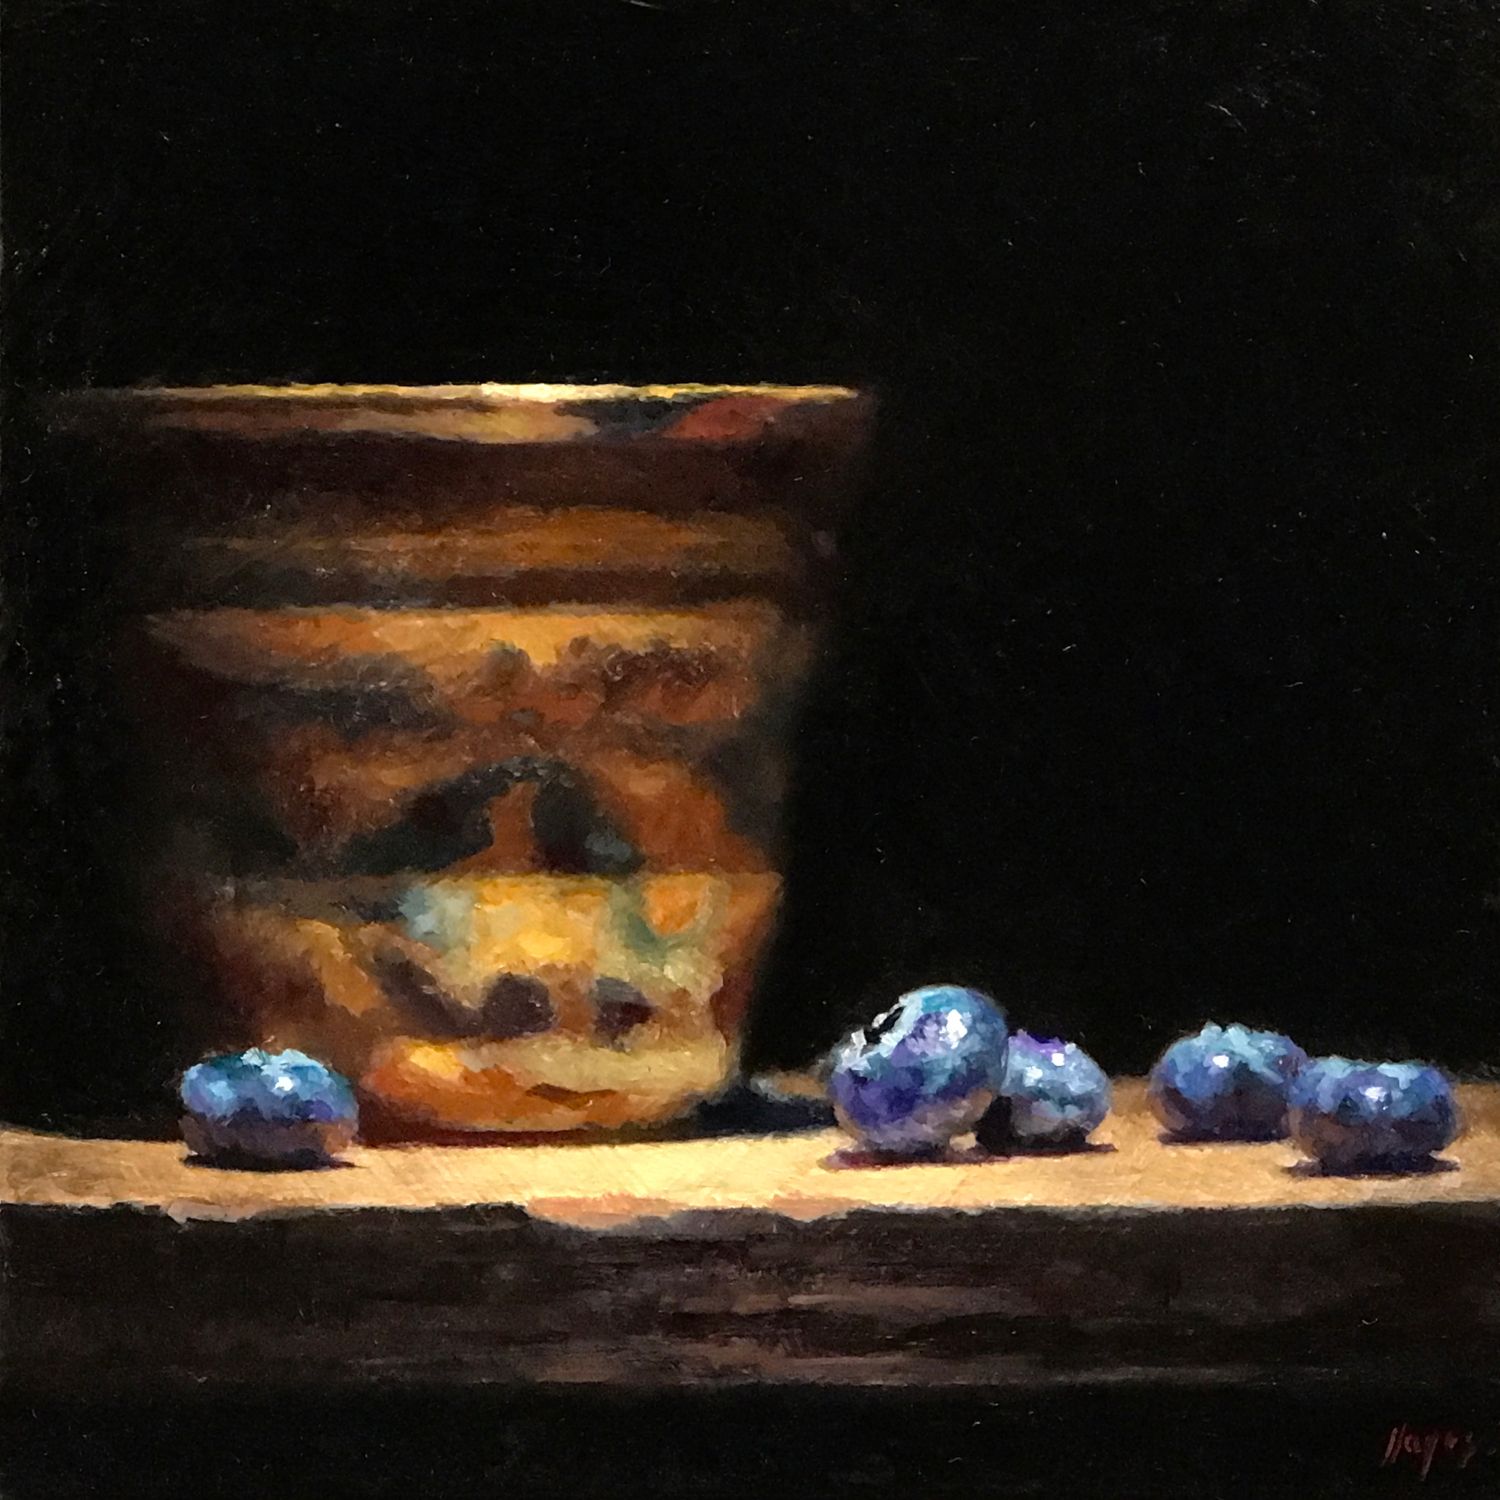 "Stoneware Cup and Blueberries” Oil on panel, 5 x 5 inches